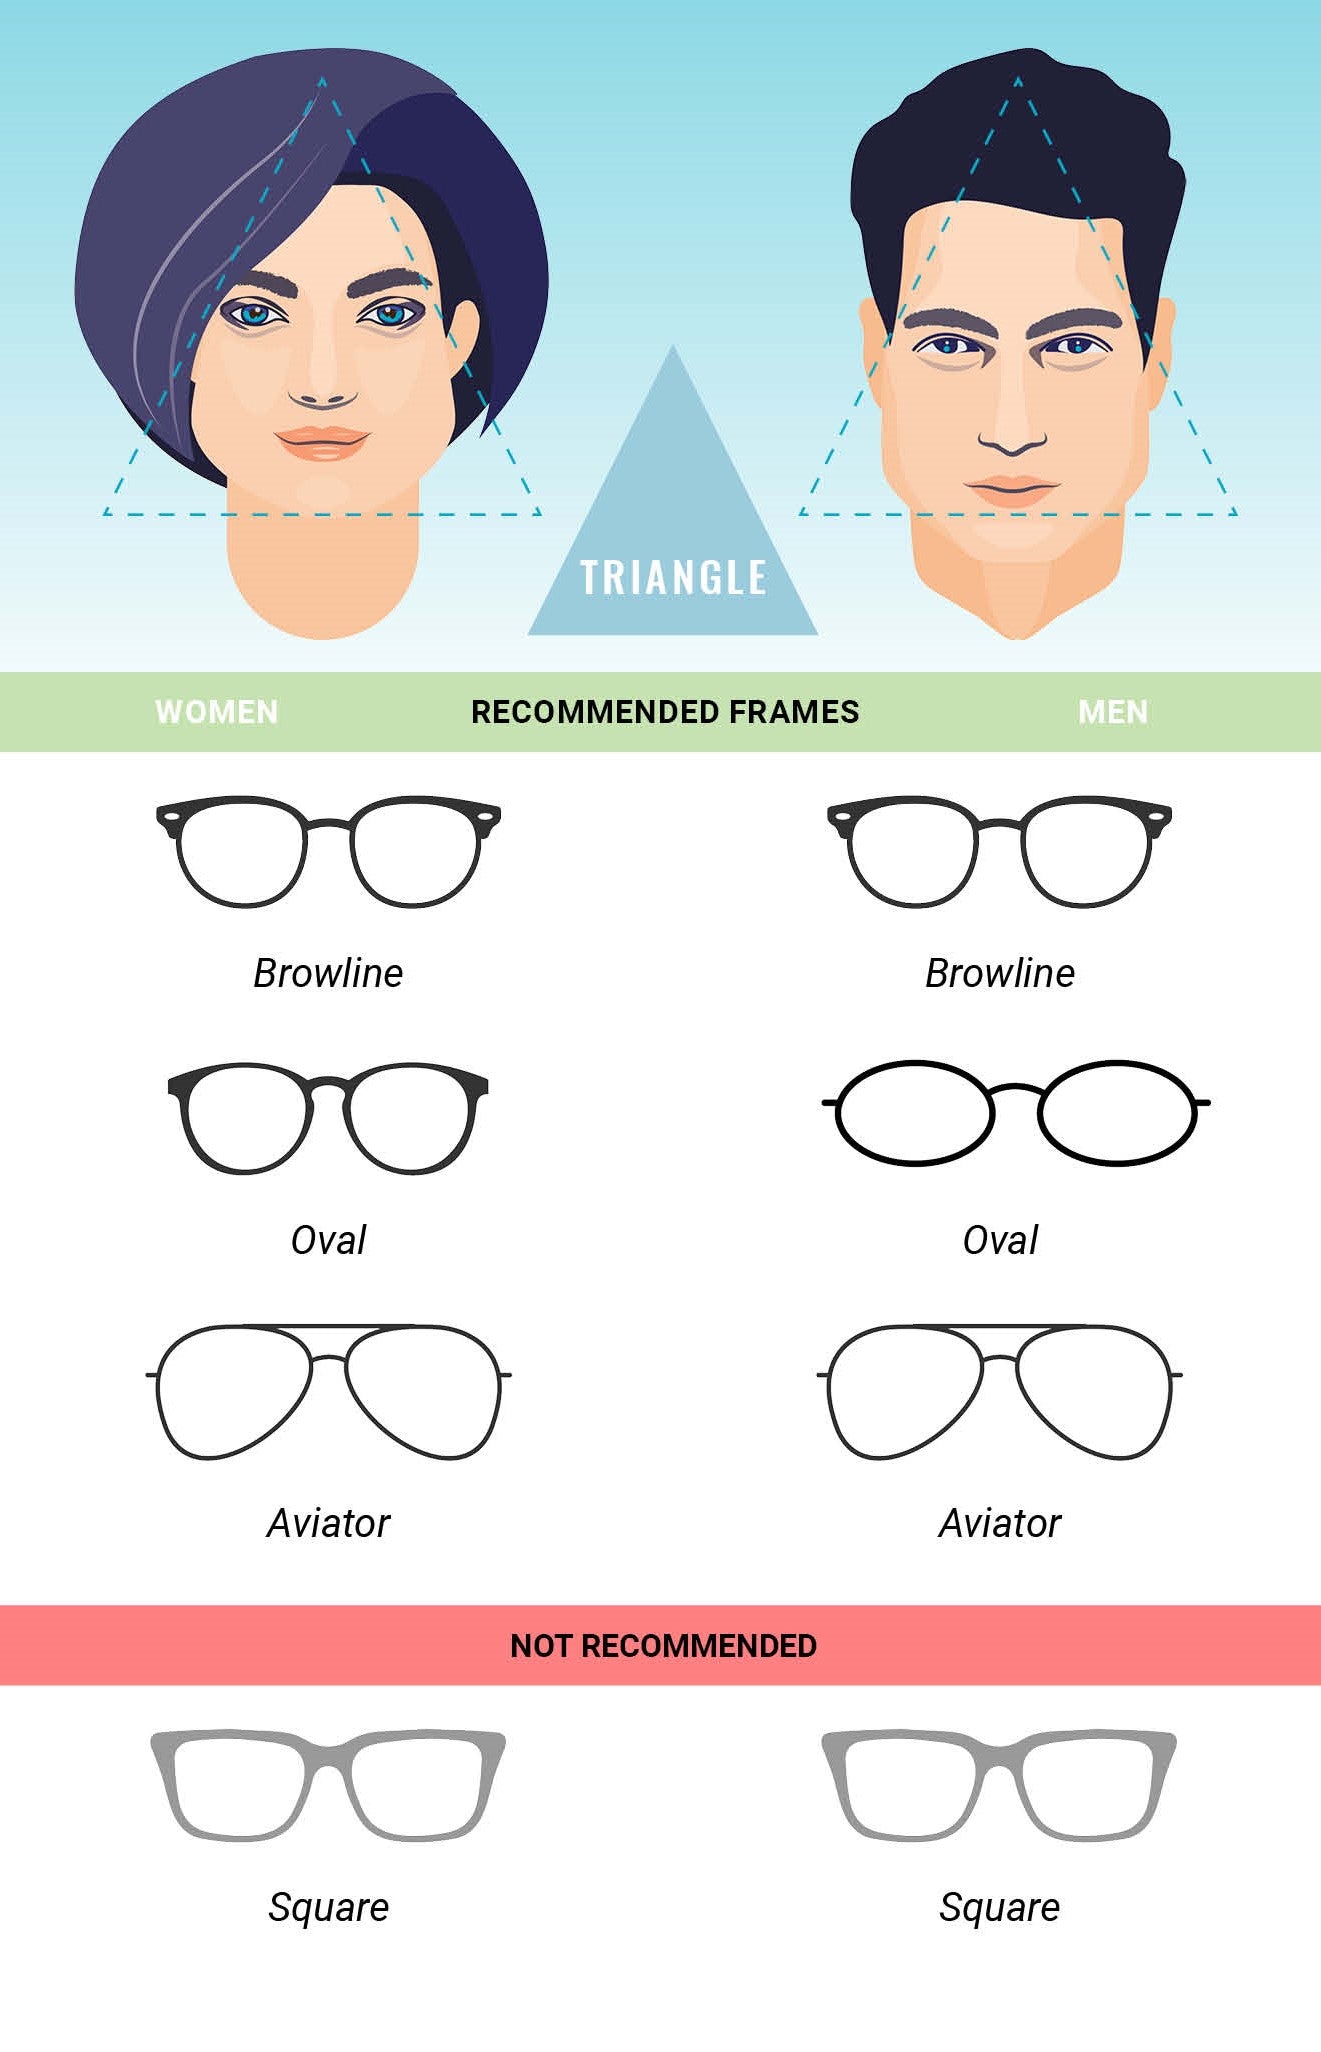 Eyeglass frame recommendations for triangle face shapes for men and women